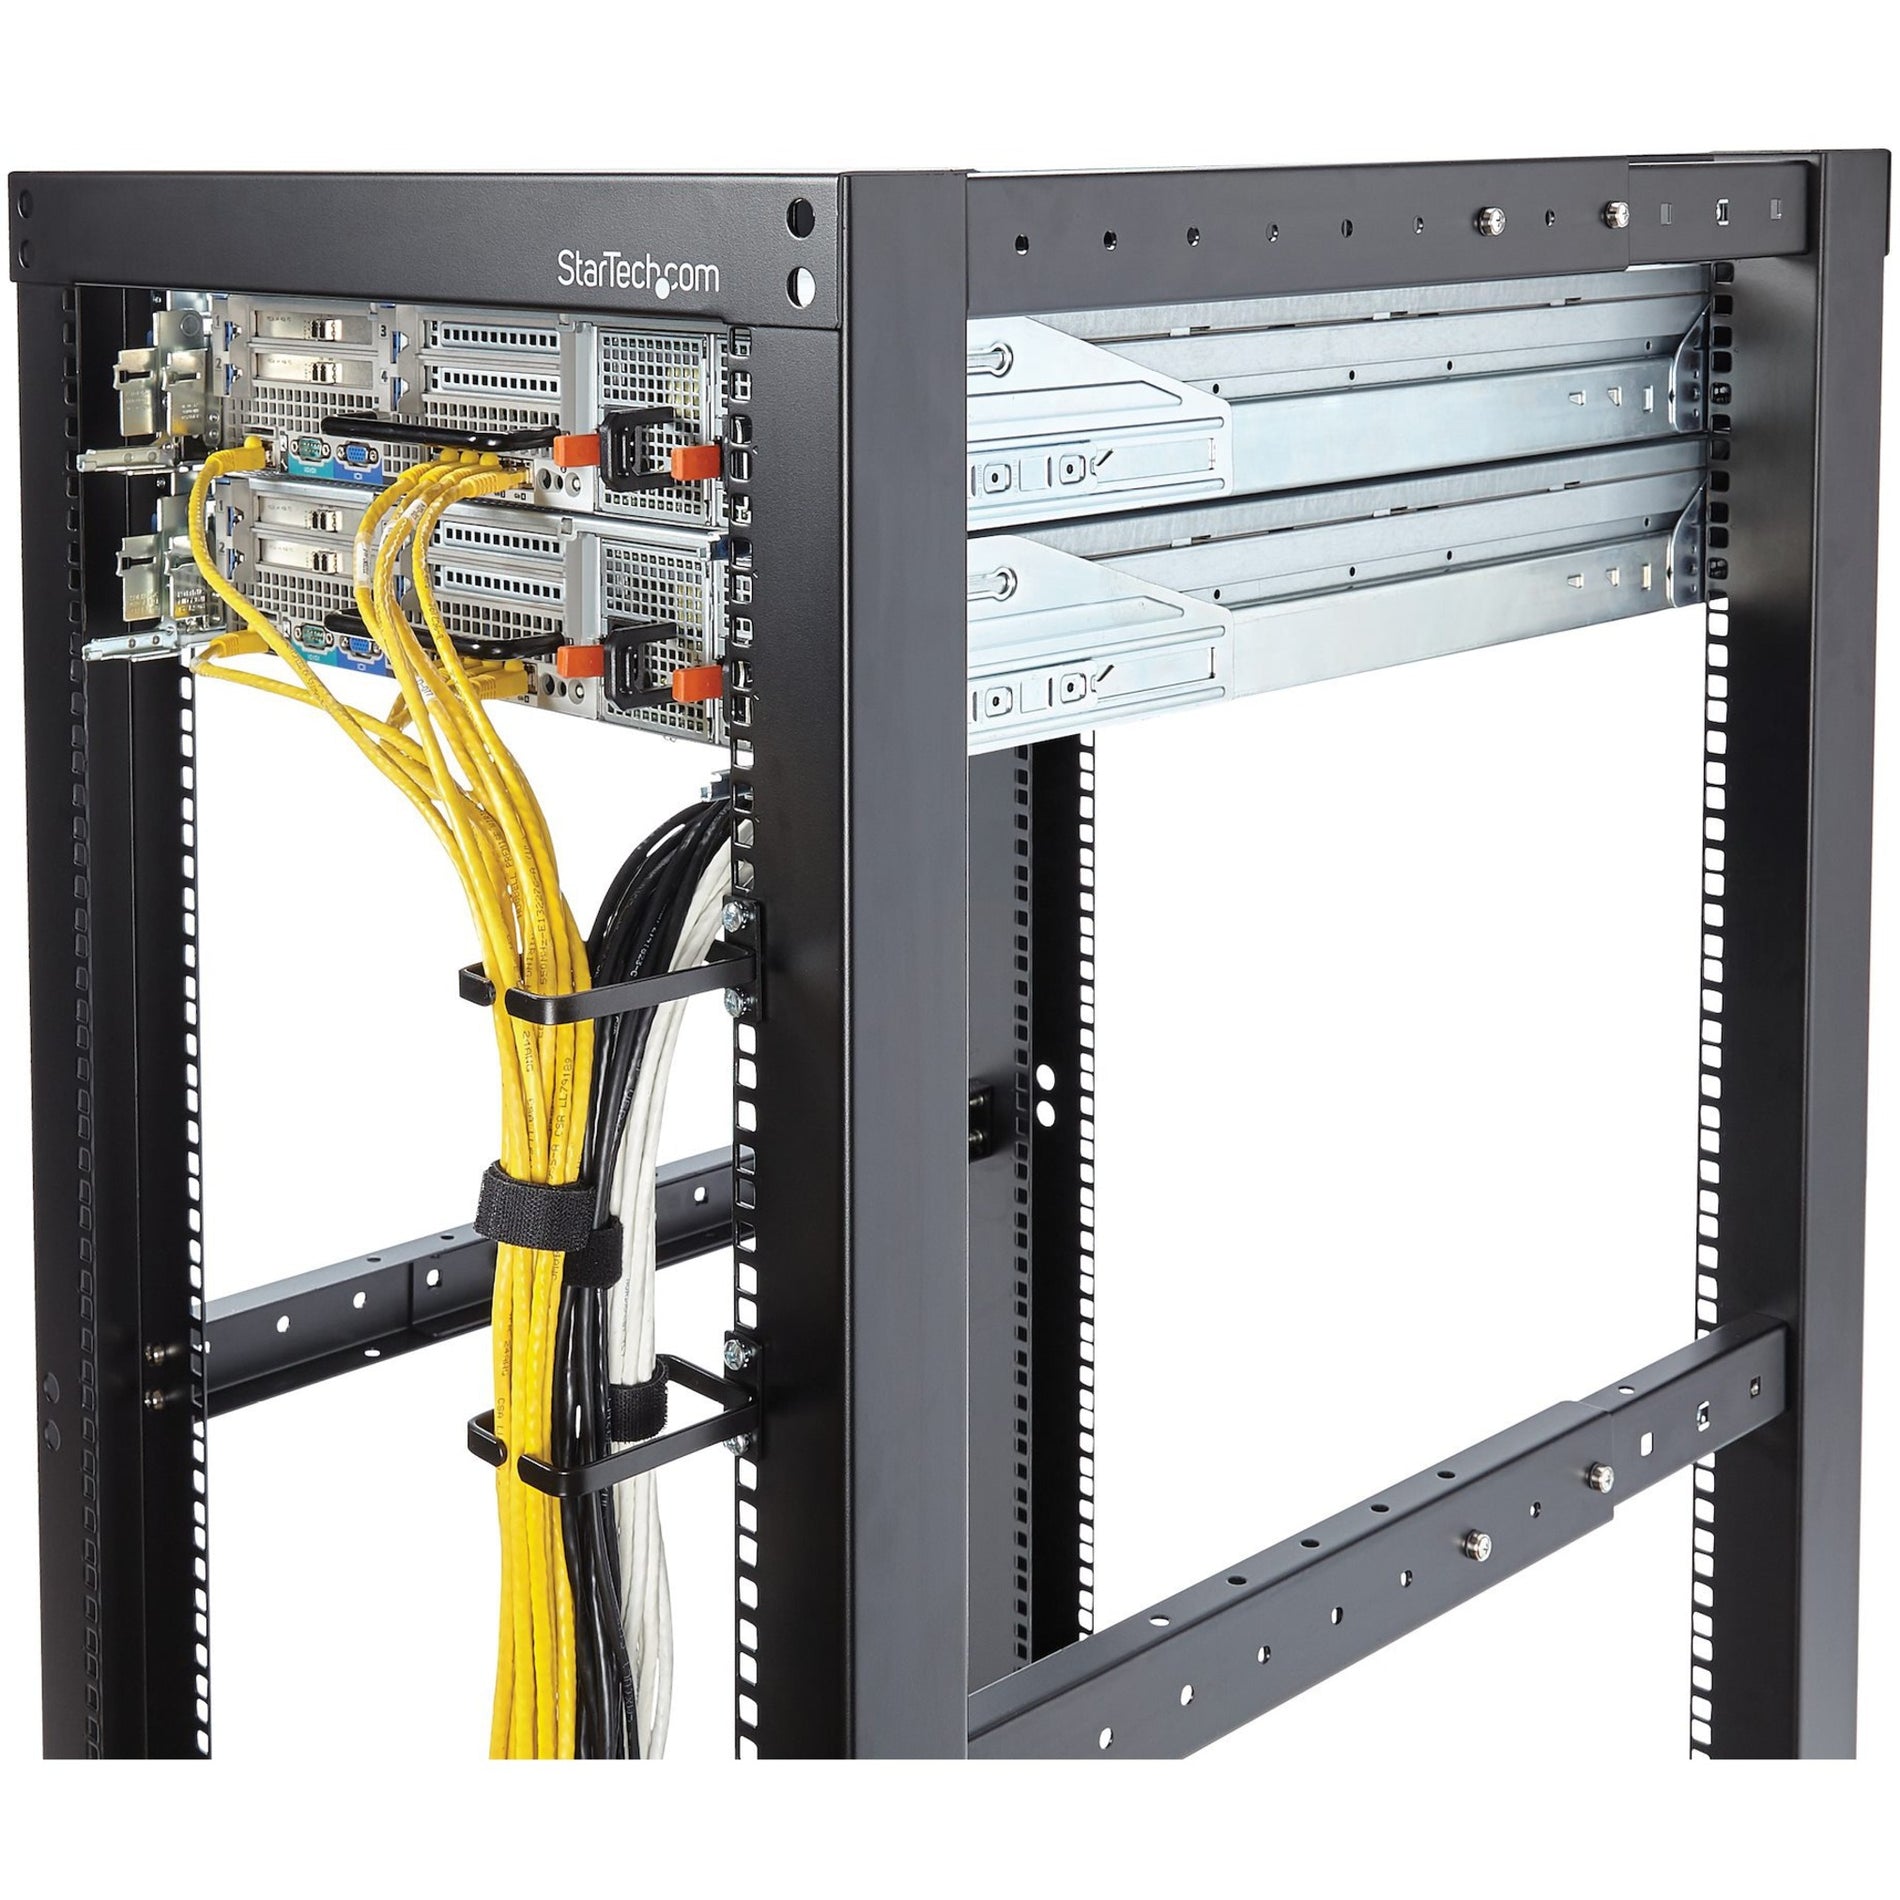 StarTech.com CMHOOK1U 1U Vertical Server Rack Cable Management D-Ring Hook - Neatly Organize Cables and Improve Rack Efficiency